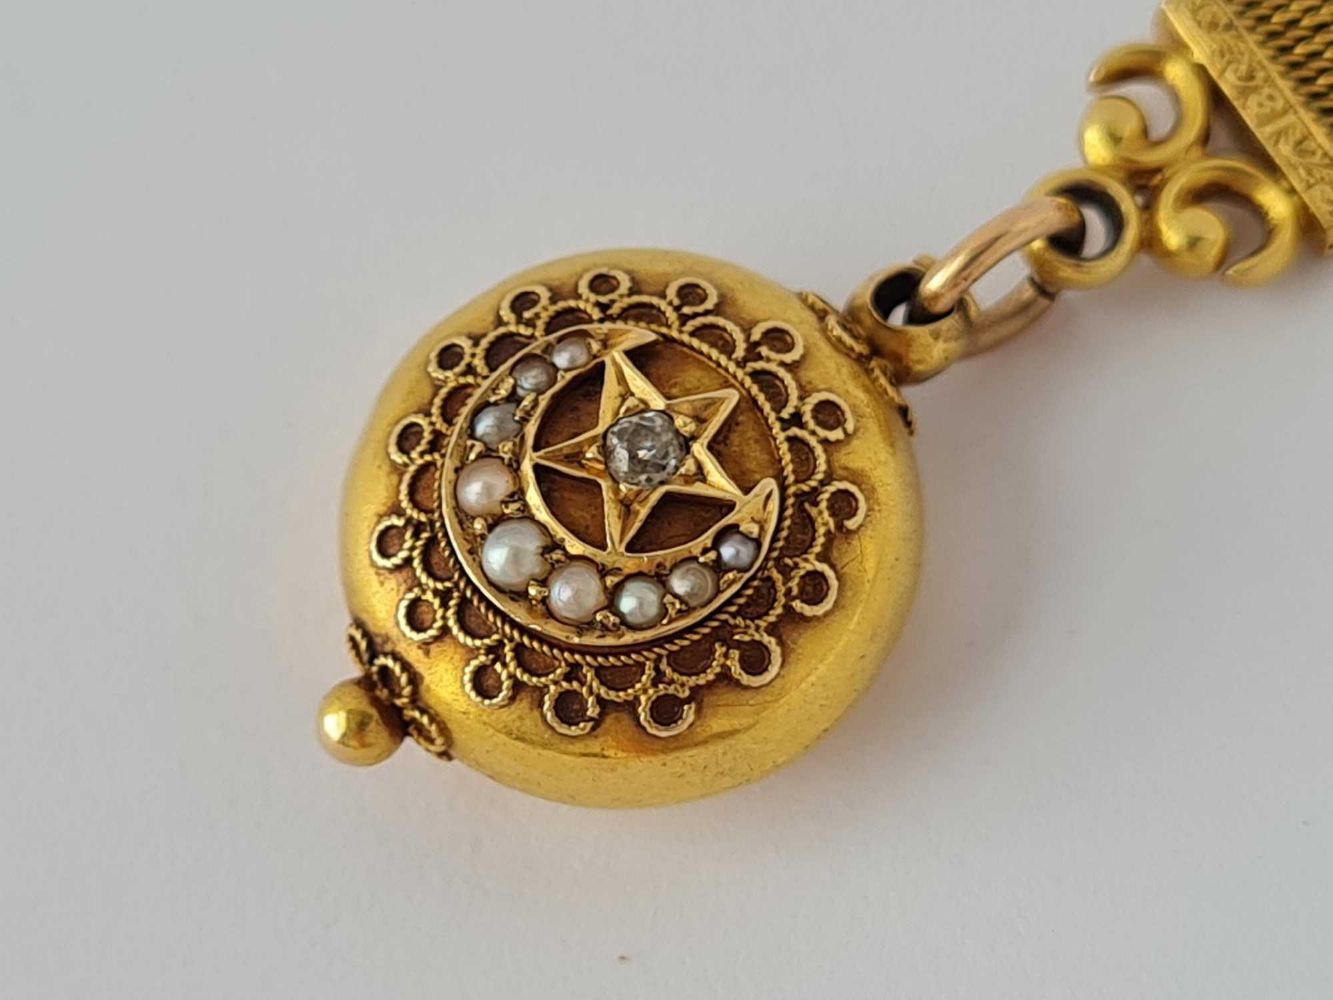 Two-Day Sale of Jewellery, Watches, Silver, Books, Coins, Ceramics, Pictures & Collectables